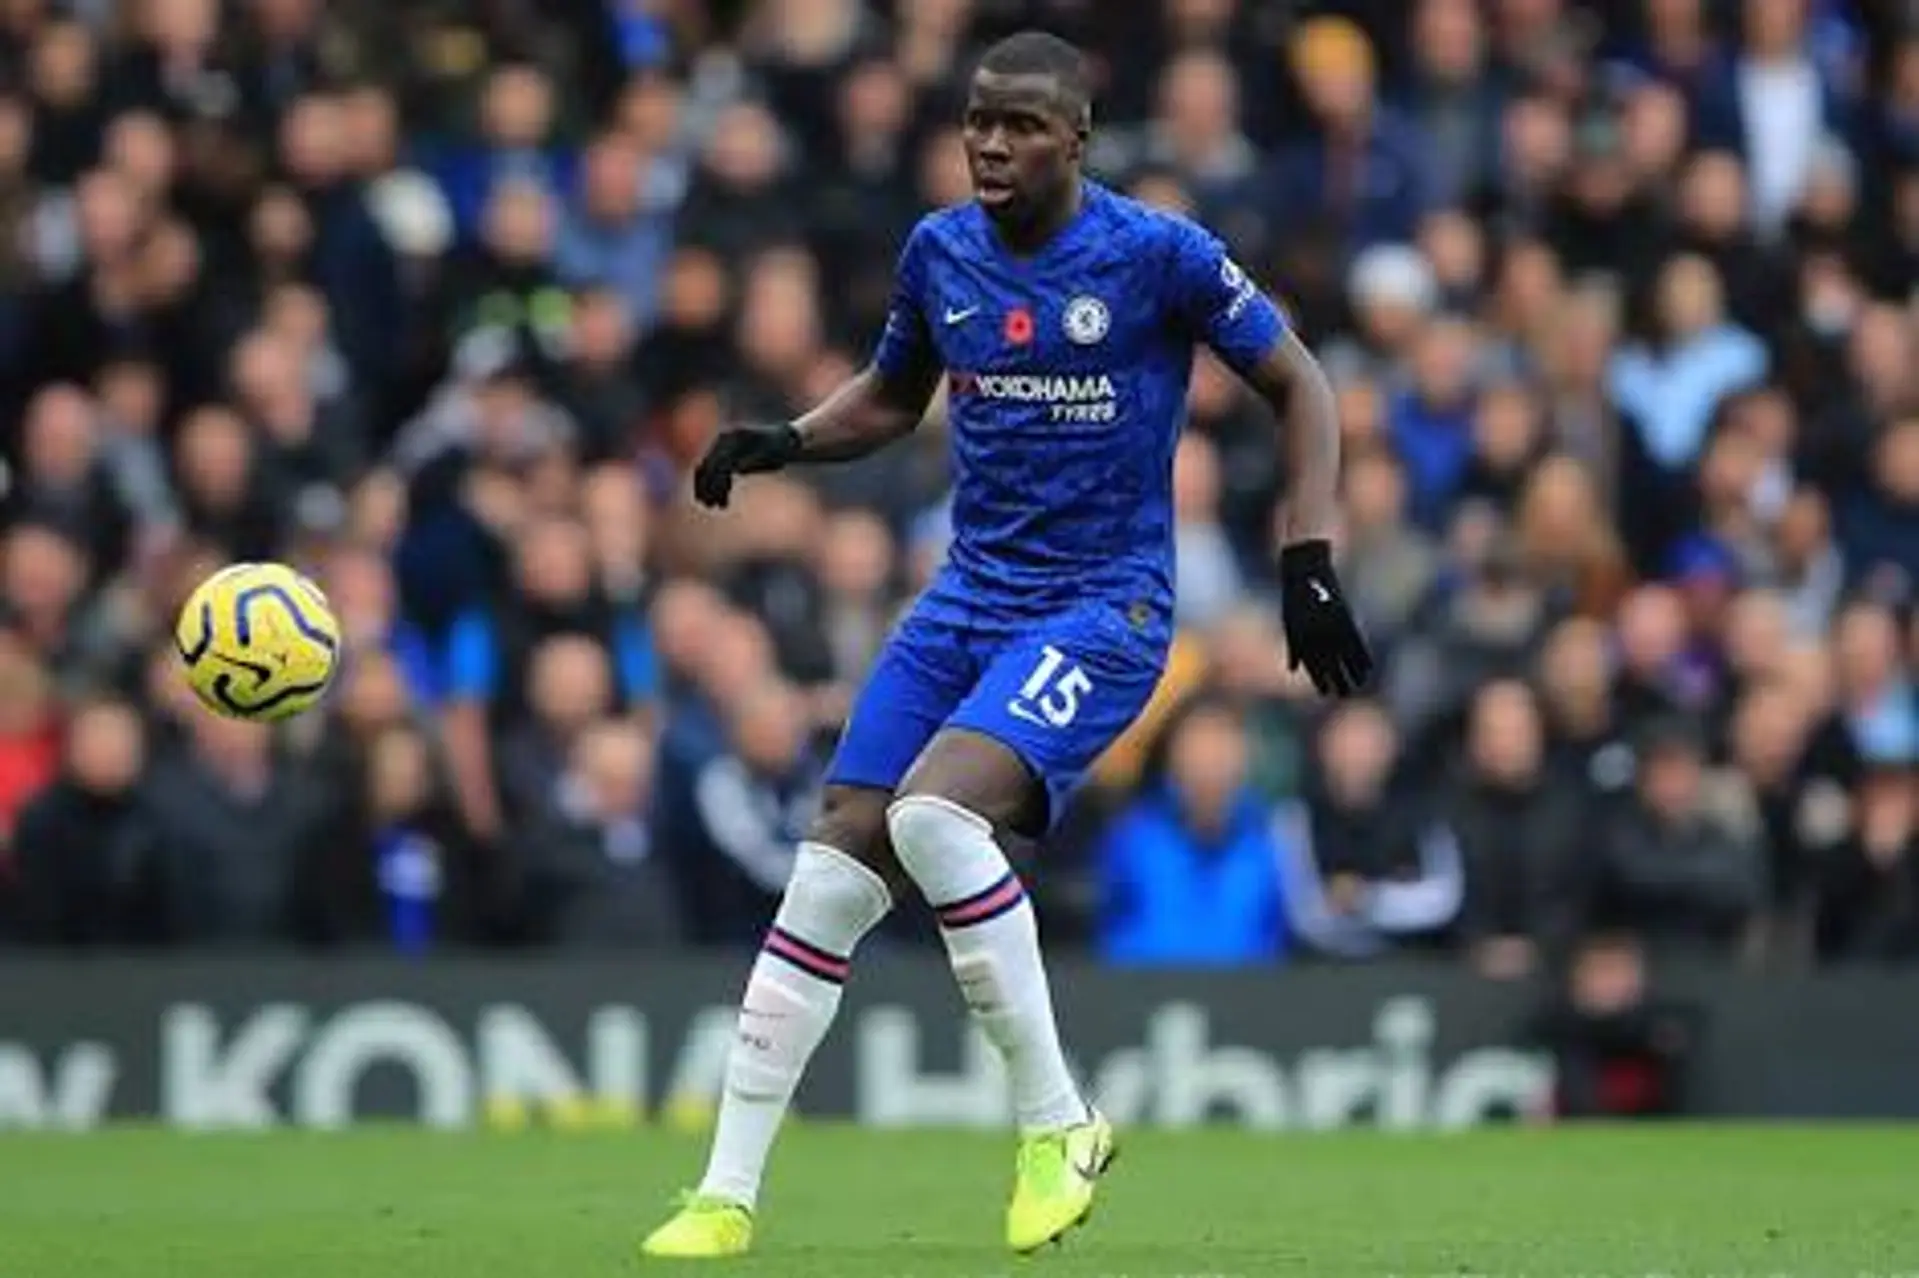 Why I Think Chelsea Should Listen to Offers for Kurt Zouma